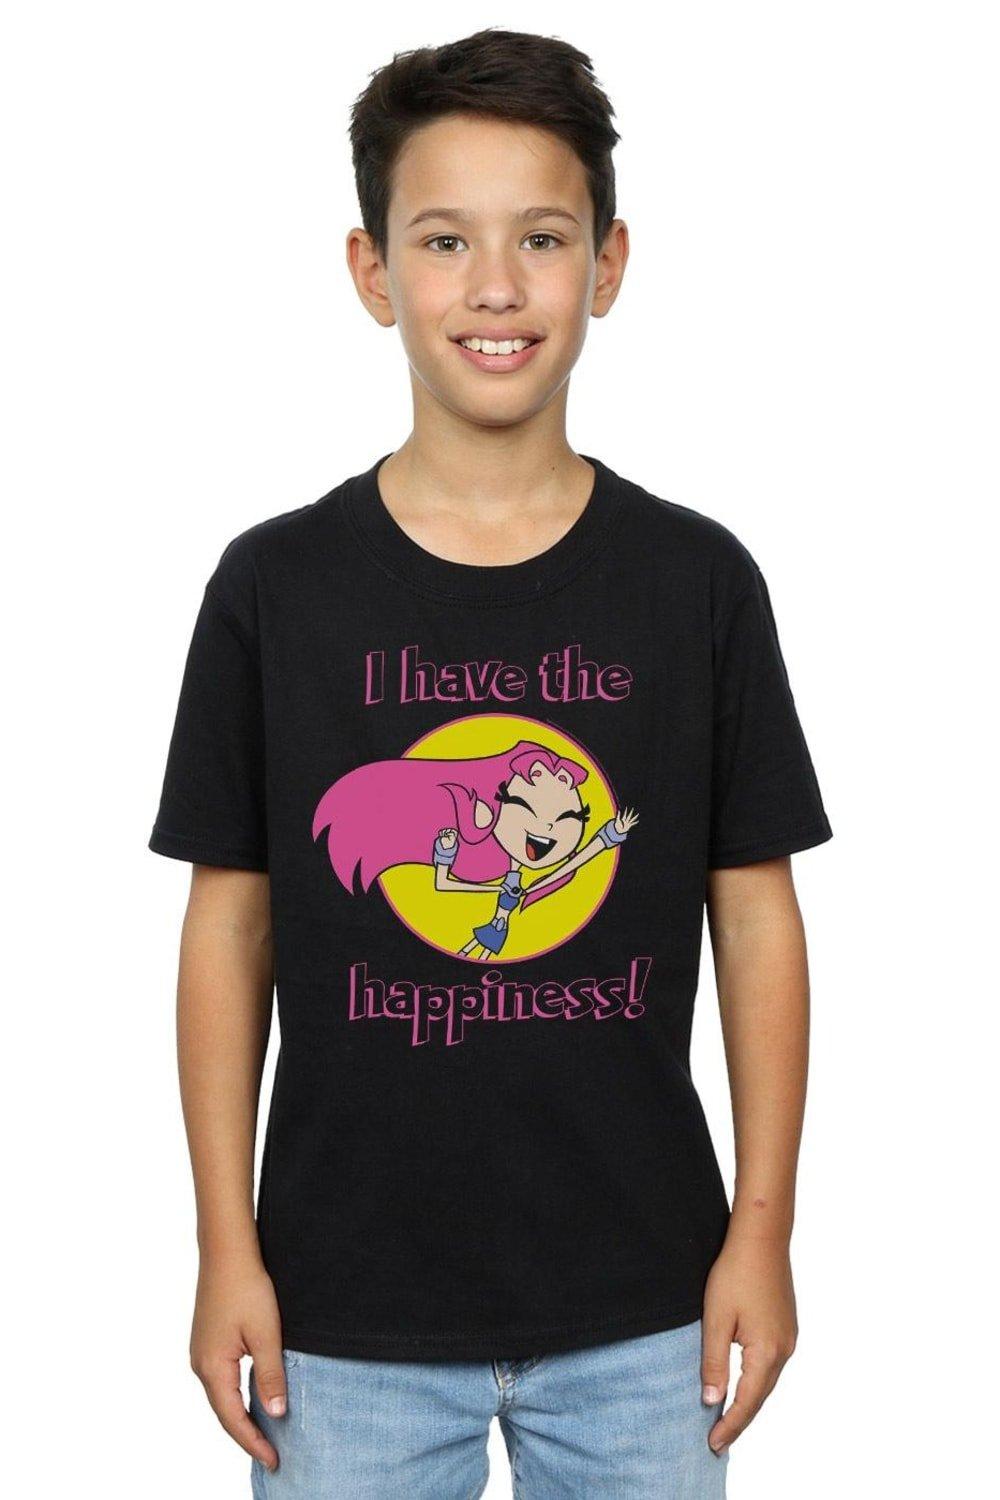 Teen Titans Go I Have The Happiness T-Shirt